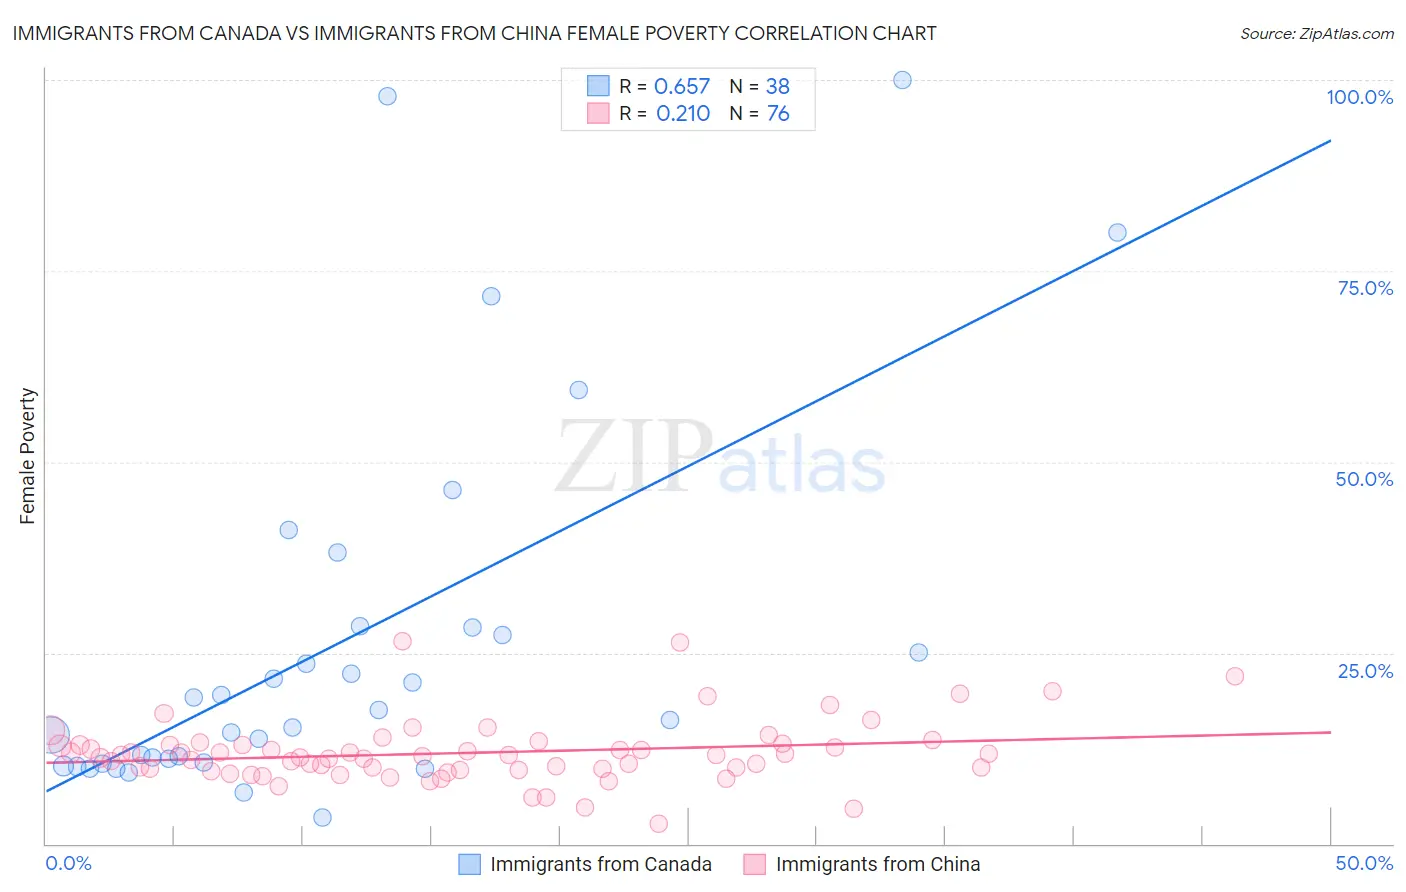 Immigrants from Canada vs Immigrants from China Female Poverty